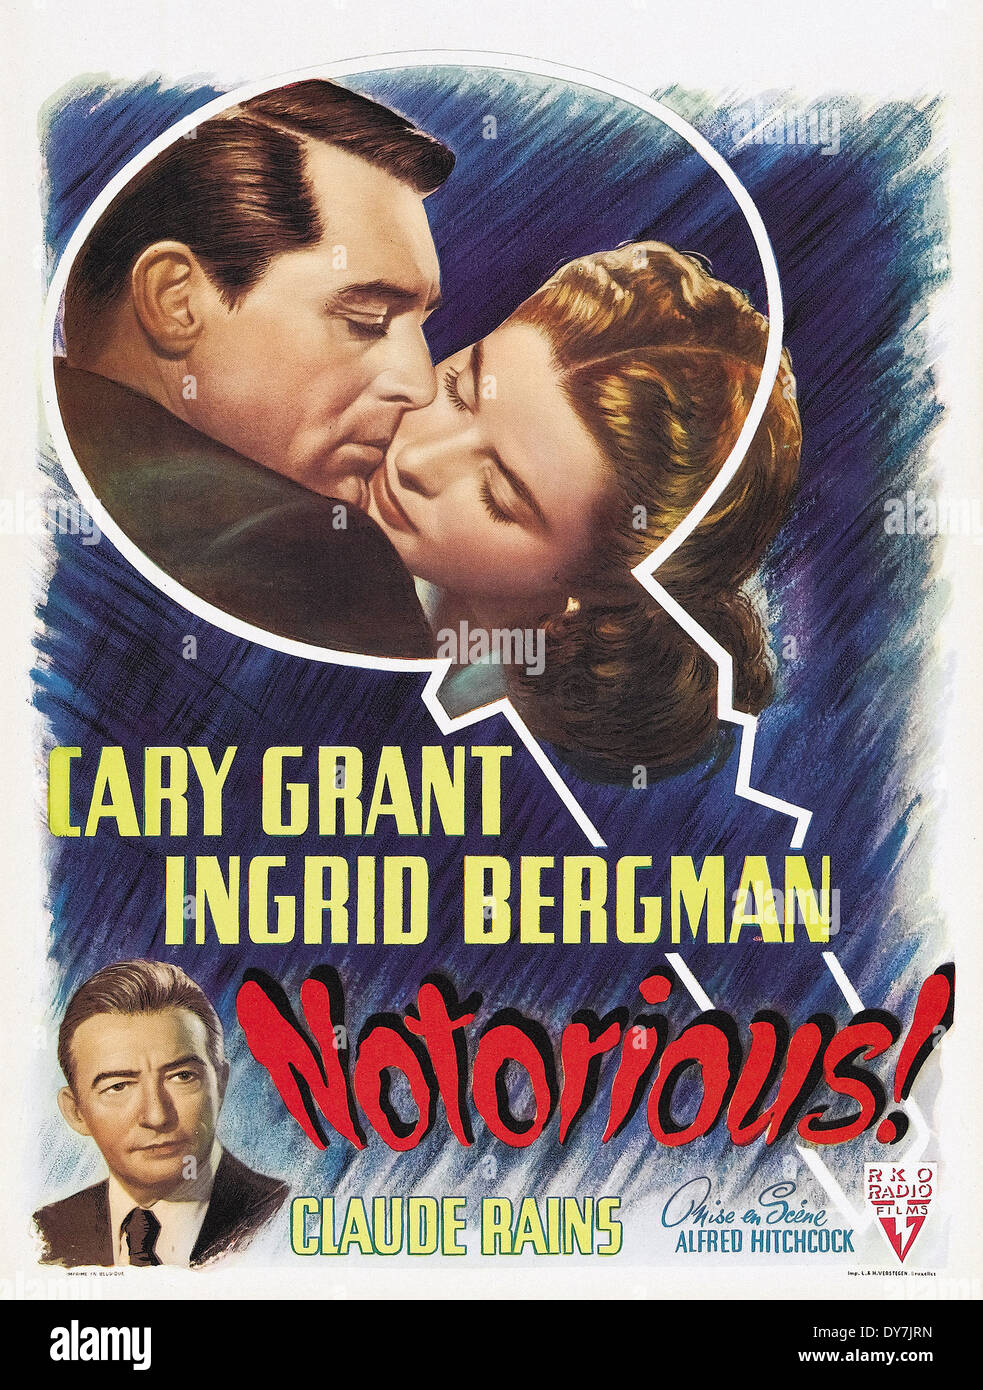 NOTORIOUS - Movie Poster - Directed by Alfred Hitchcock - RKO - 1946 Stock Photo